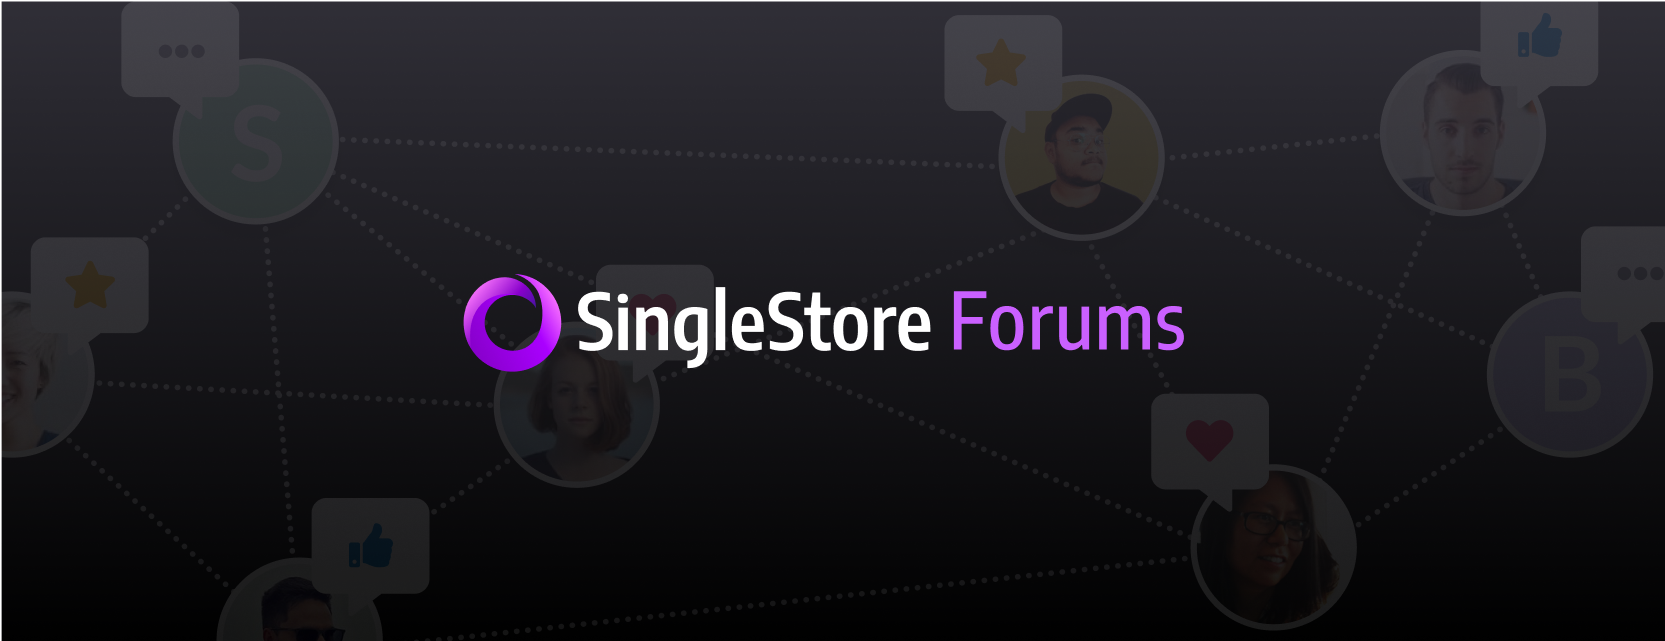 SingleStore Forums Announces First Community Star